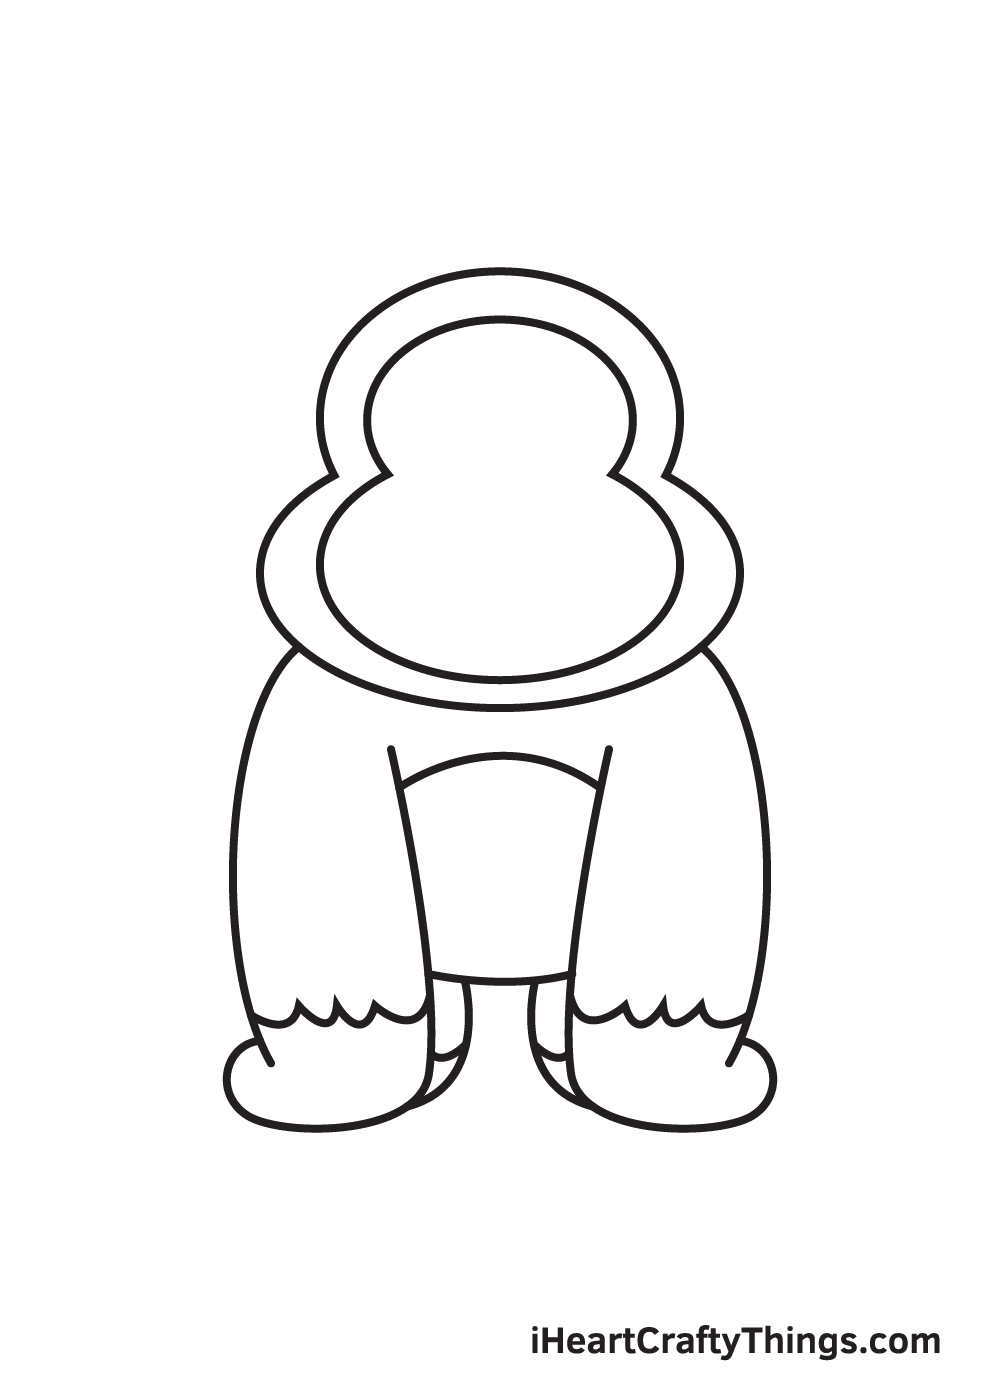 A Gorilla, Isolated Vector Illustration. Cute Cartoon Picture Of A Monkey.  A Smiling Ape Sticker. Simple Drawing For Kids Of A Gorilla On White  Background. A Prime. An African Animal Royalty Free